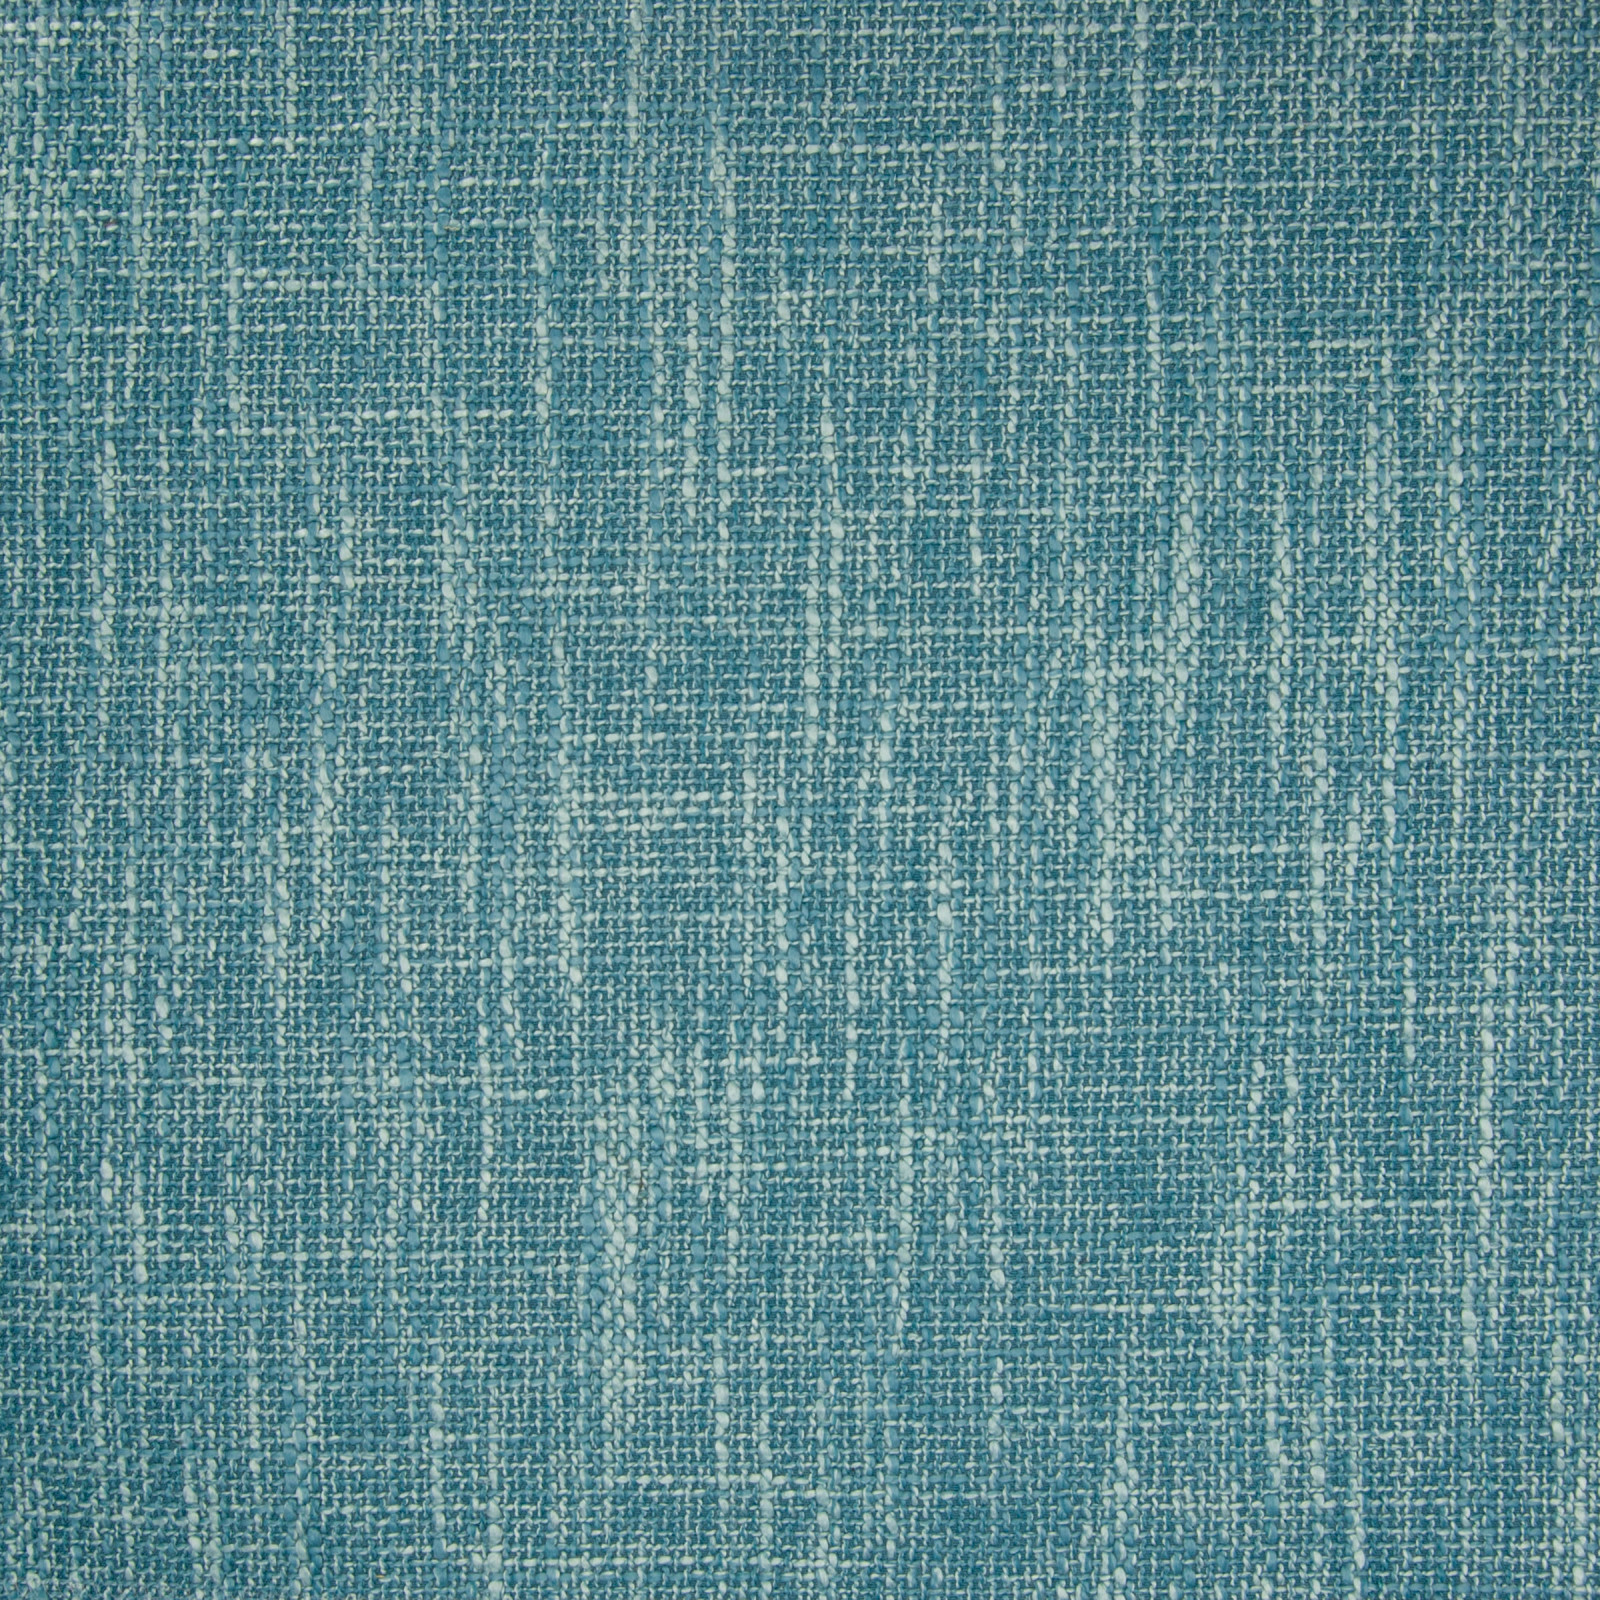 Turquoise Teal and Blue Solid Woven Upholstery Fabric